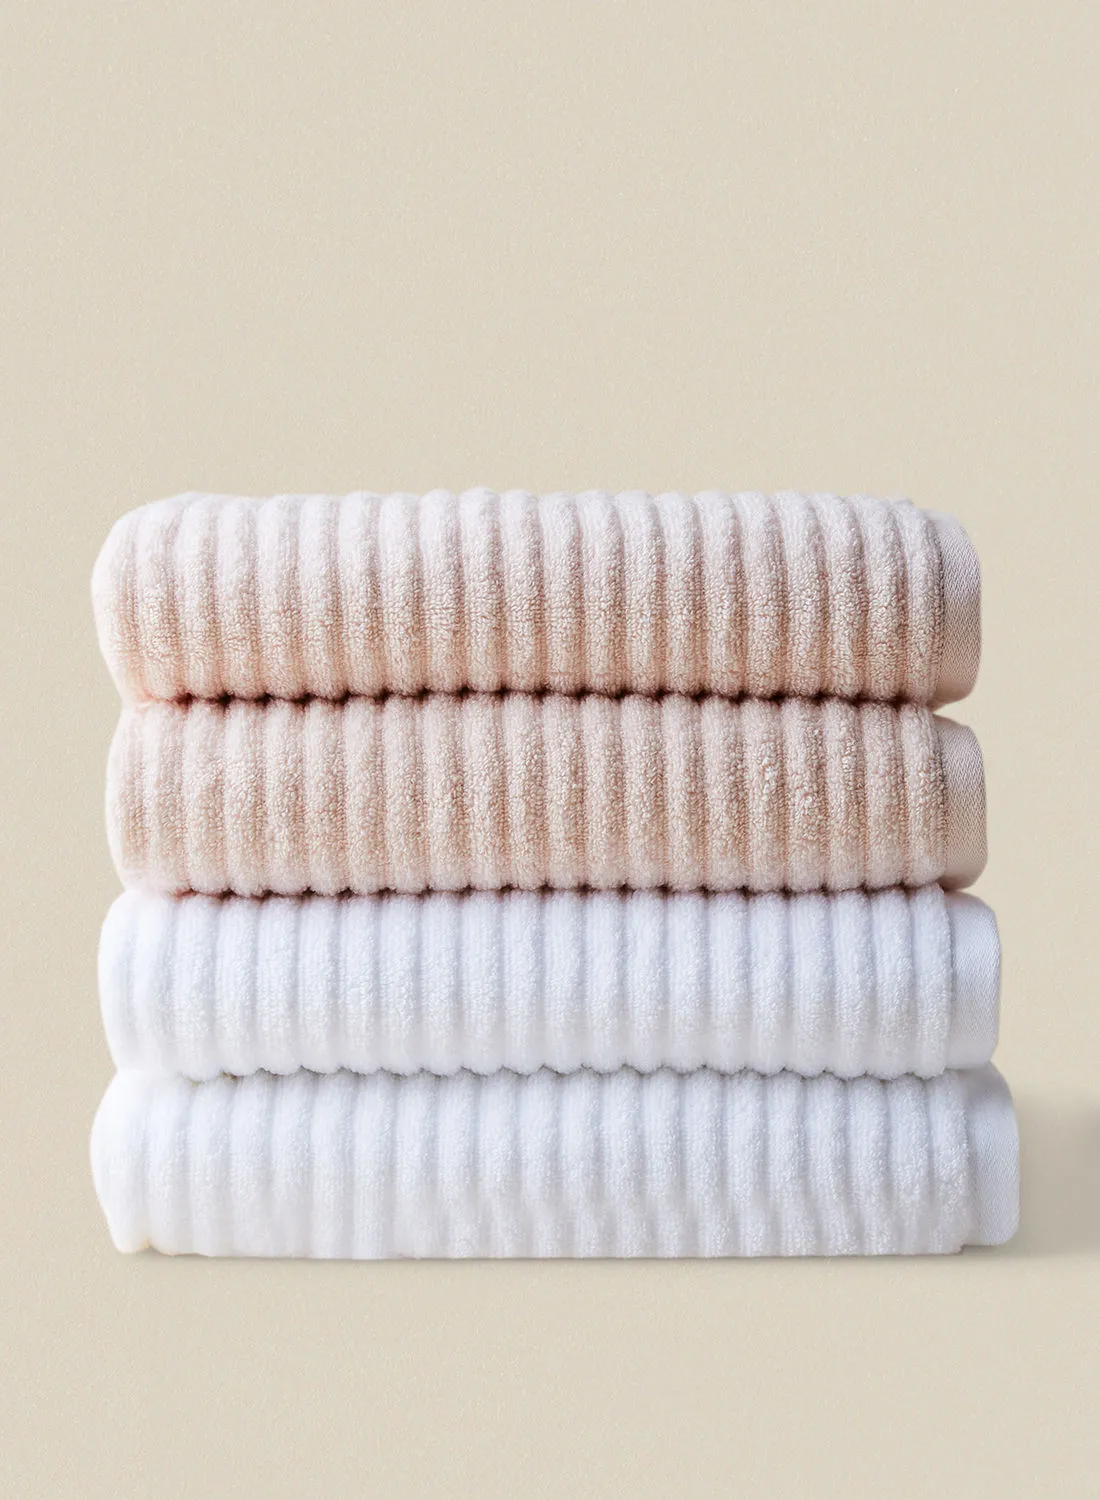 noon east 4 Piece Bathroom Towel Set - 450 GSM 100% Cotton Ribbed - 4 Bath Towel - Multcolor_Beige_White Color - Highly Absorbent - Fast Dry